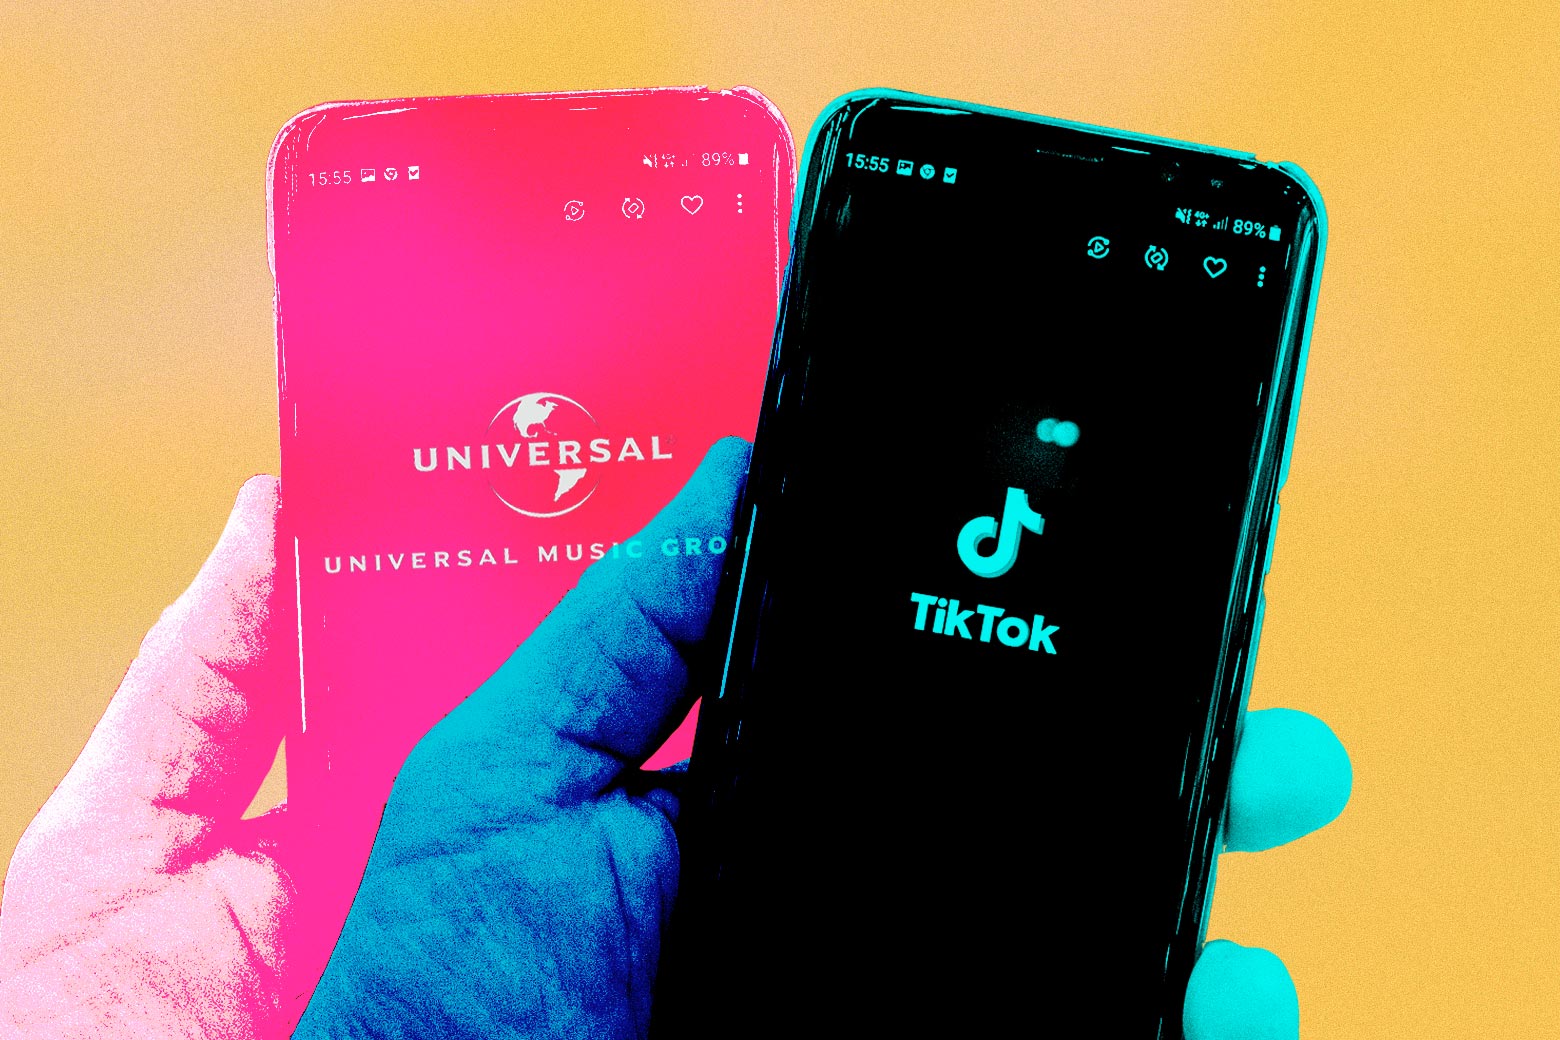 Two phones held near each other display the logos of TikTok and Universal Music Group, respectively.